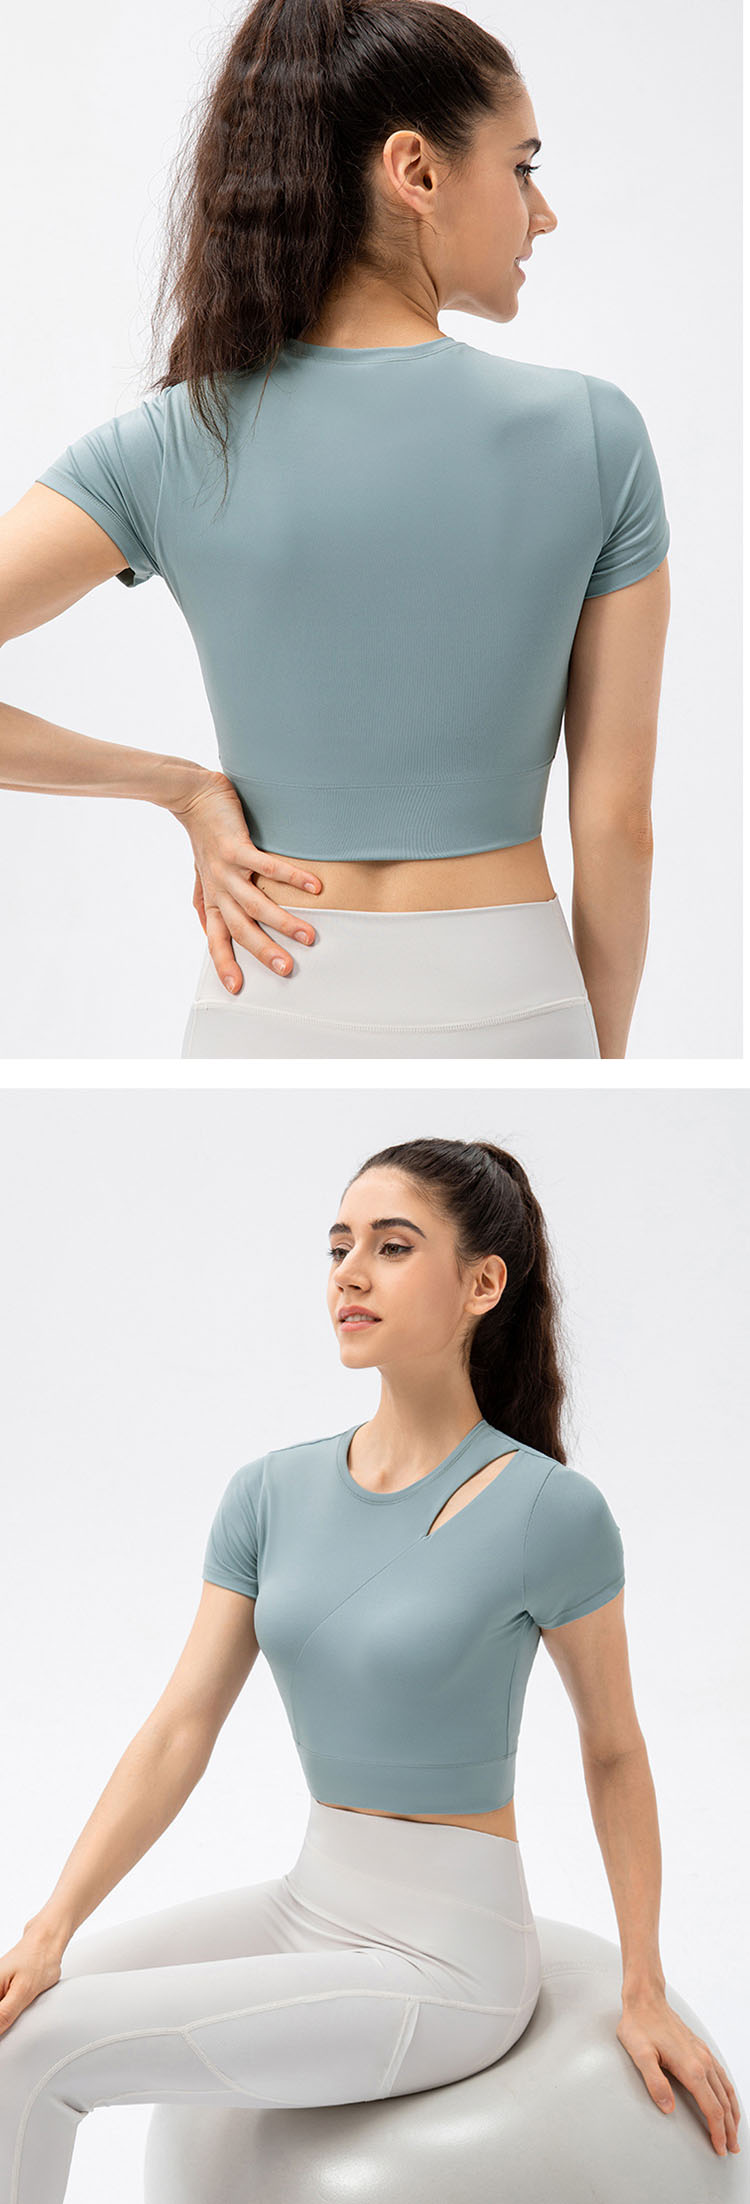 The shoulders are cutout to release the heat of exercise and keep the skin breathable and dry